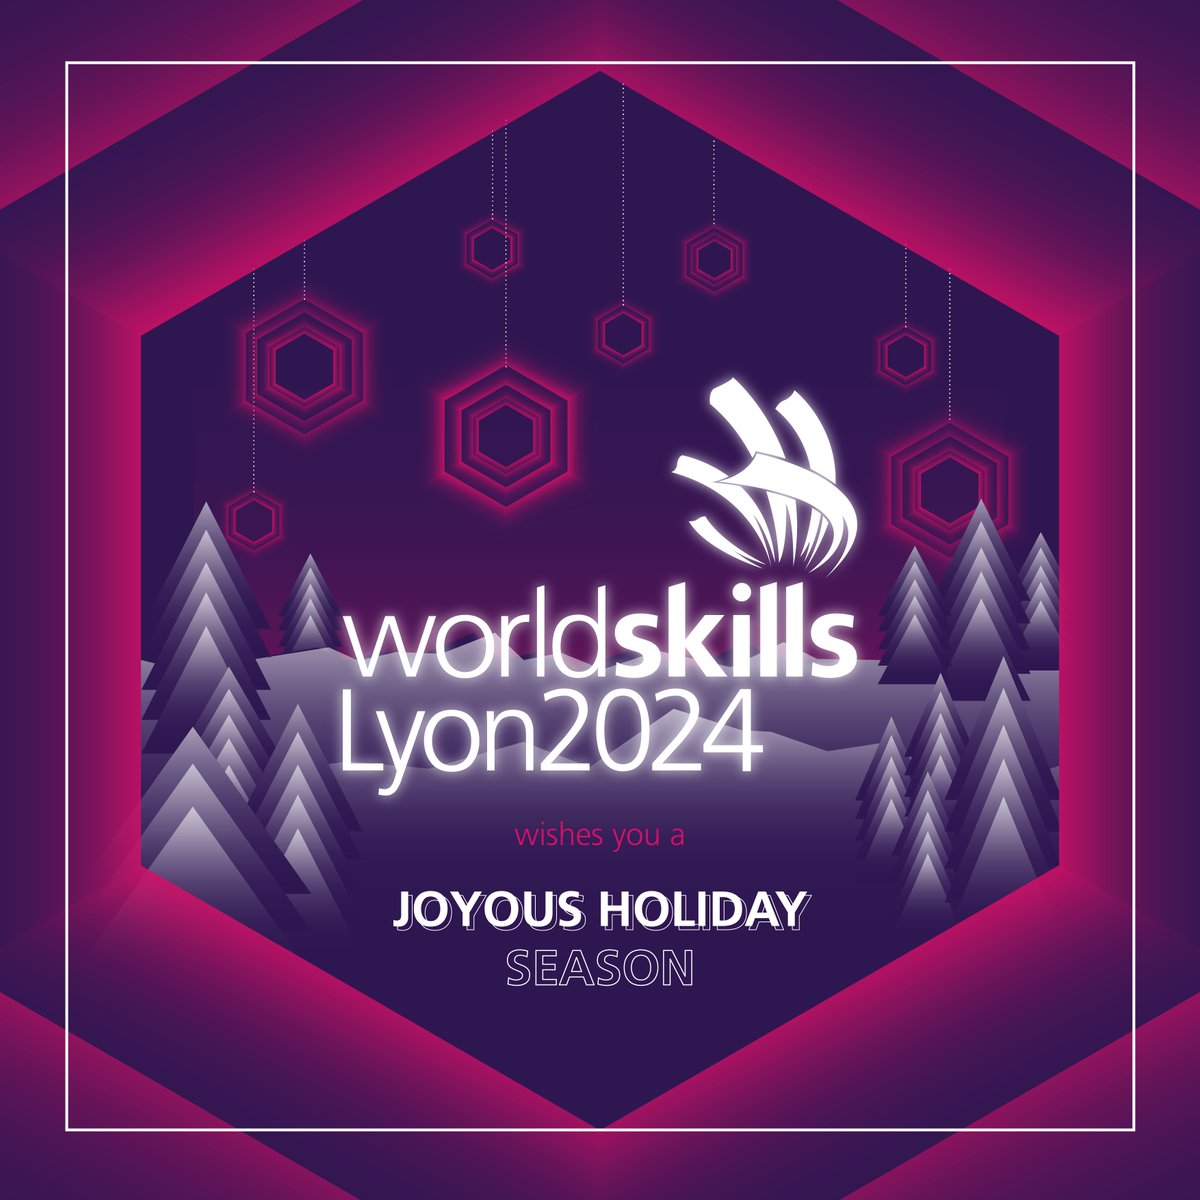 Happy holidays to you all, get ready for a thrilling 2024 🌟 And remember, where there is a skill, there is a way! #WSC2024